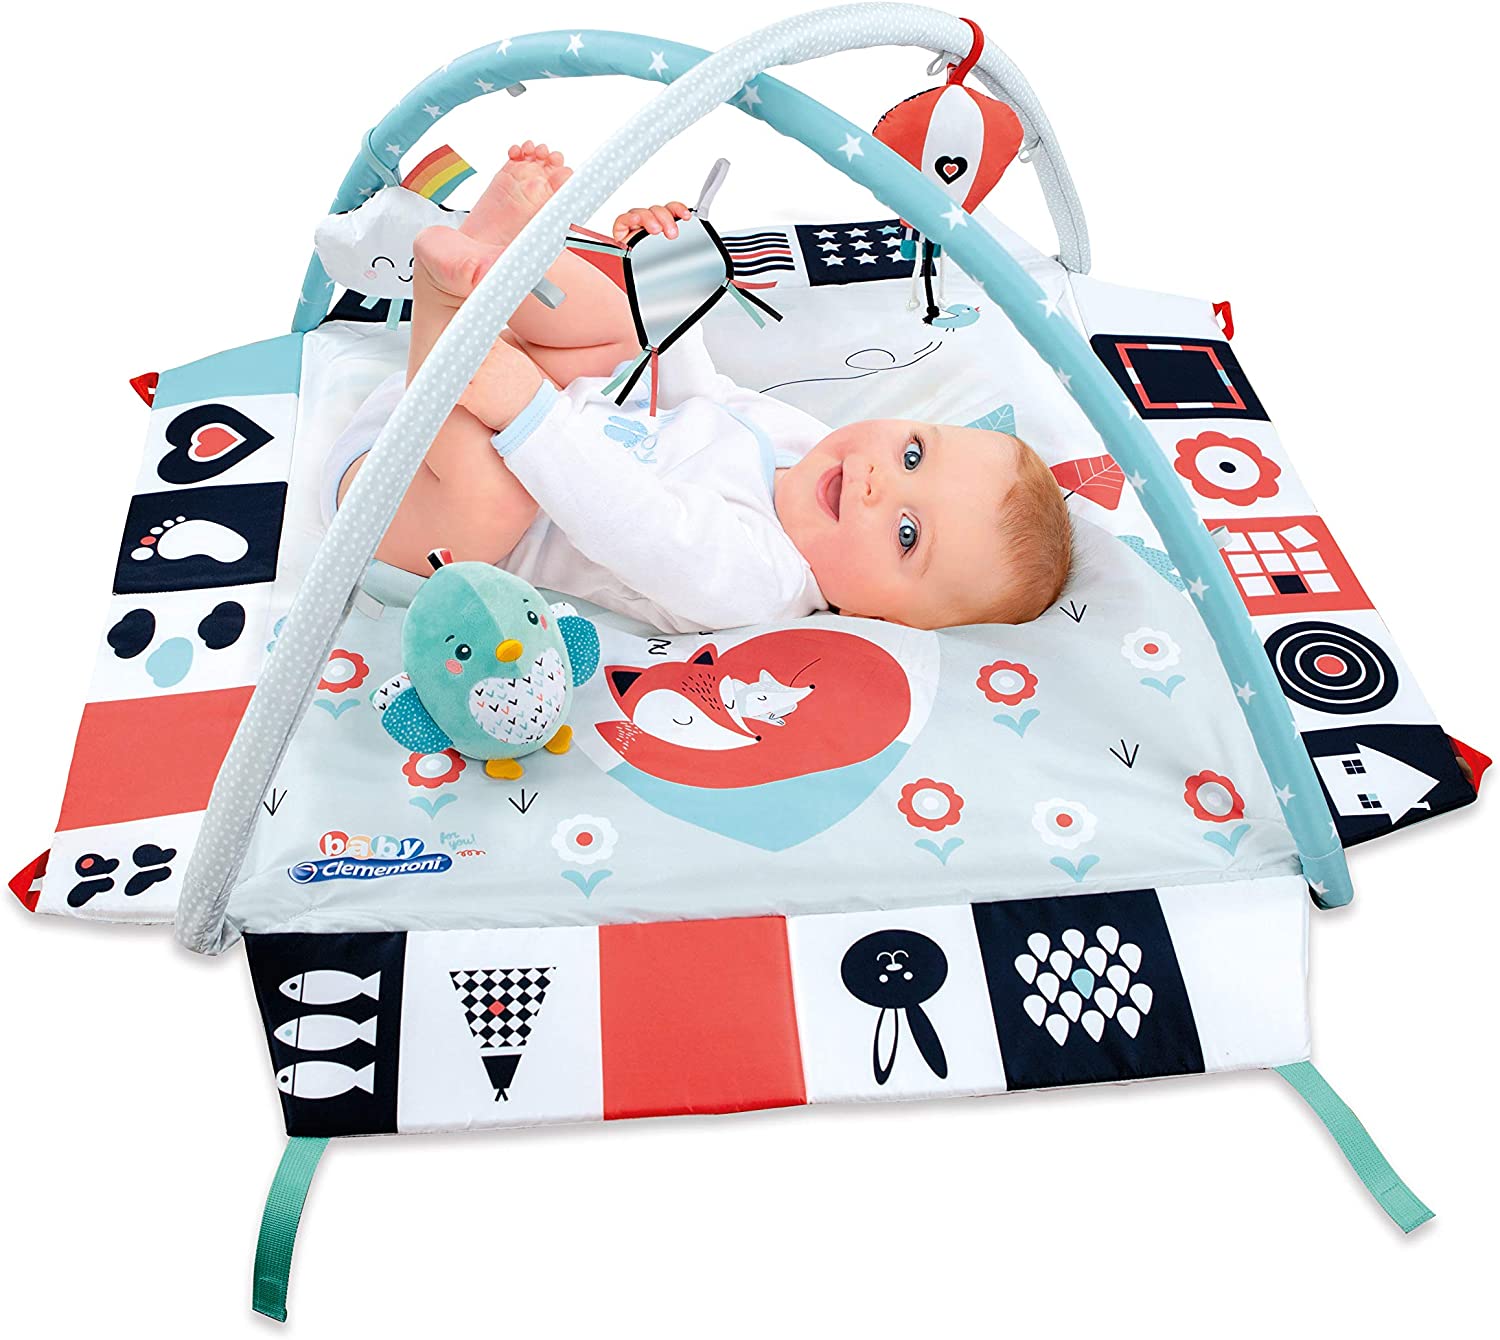 Clementoni 17319 Black & White Play Trainer, Play Arch with Crawling Mat for Babies, Activity Centre for Development of Senses, Play Trapeze with Cute Figures, Ideal as Easter Gift